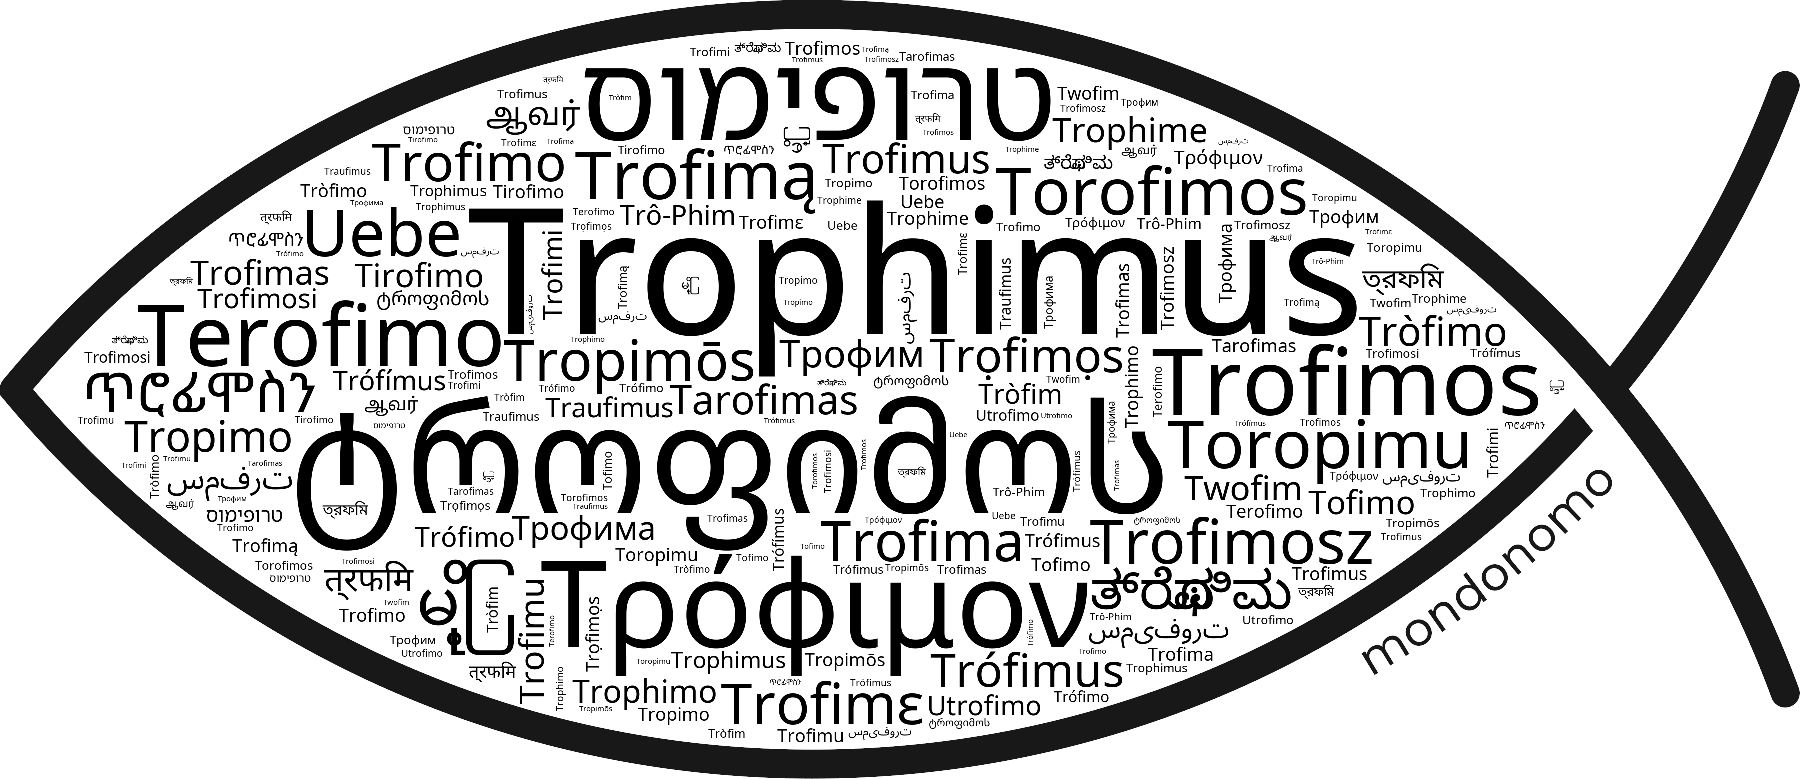 Name Trophimus in the world's Bibles